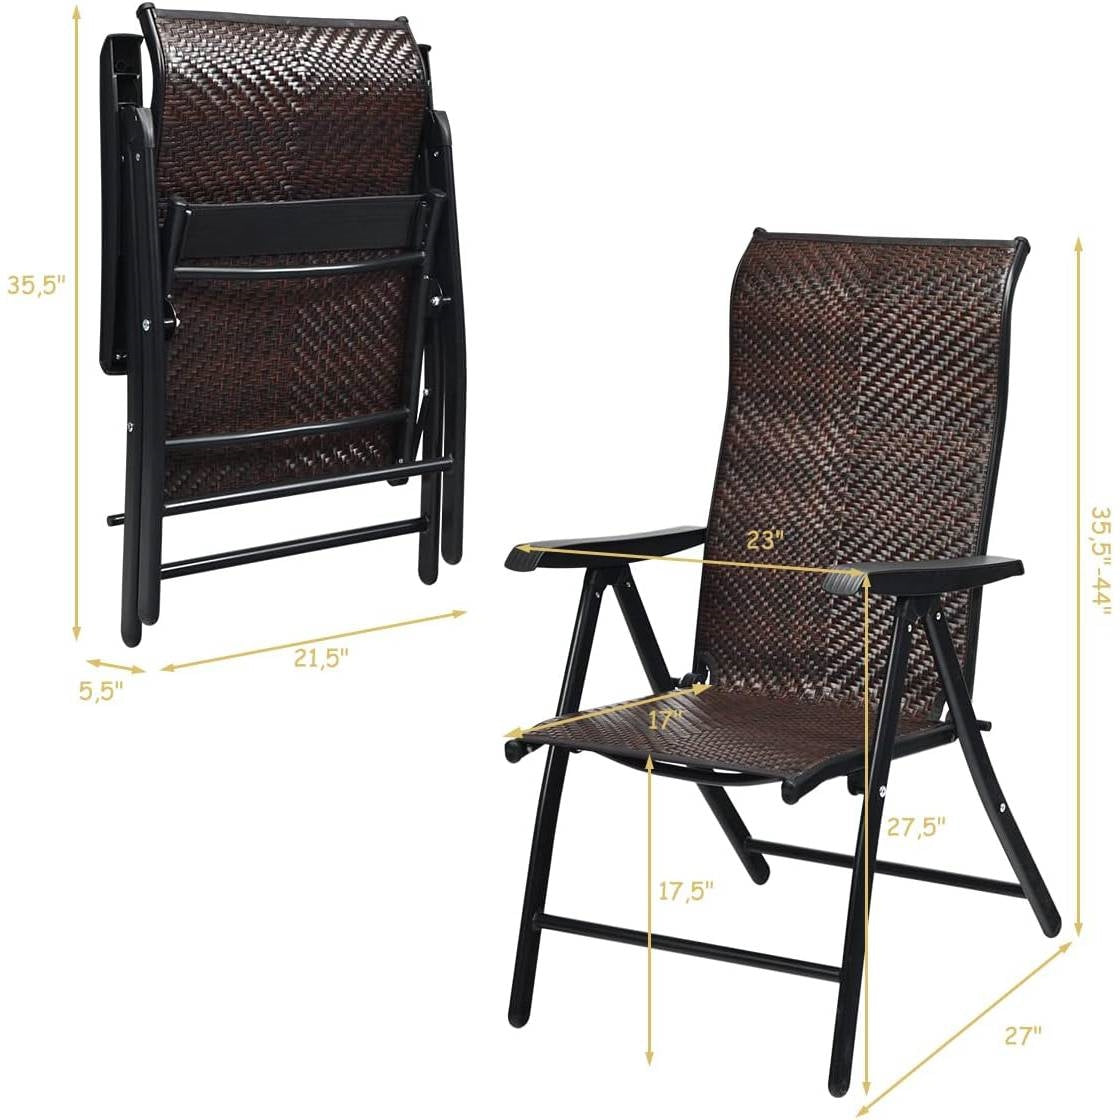 Outdoor/Indoor Folding Patio Chair with Brown Rattan Seat and High Back-Rest